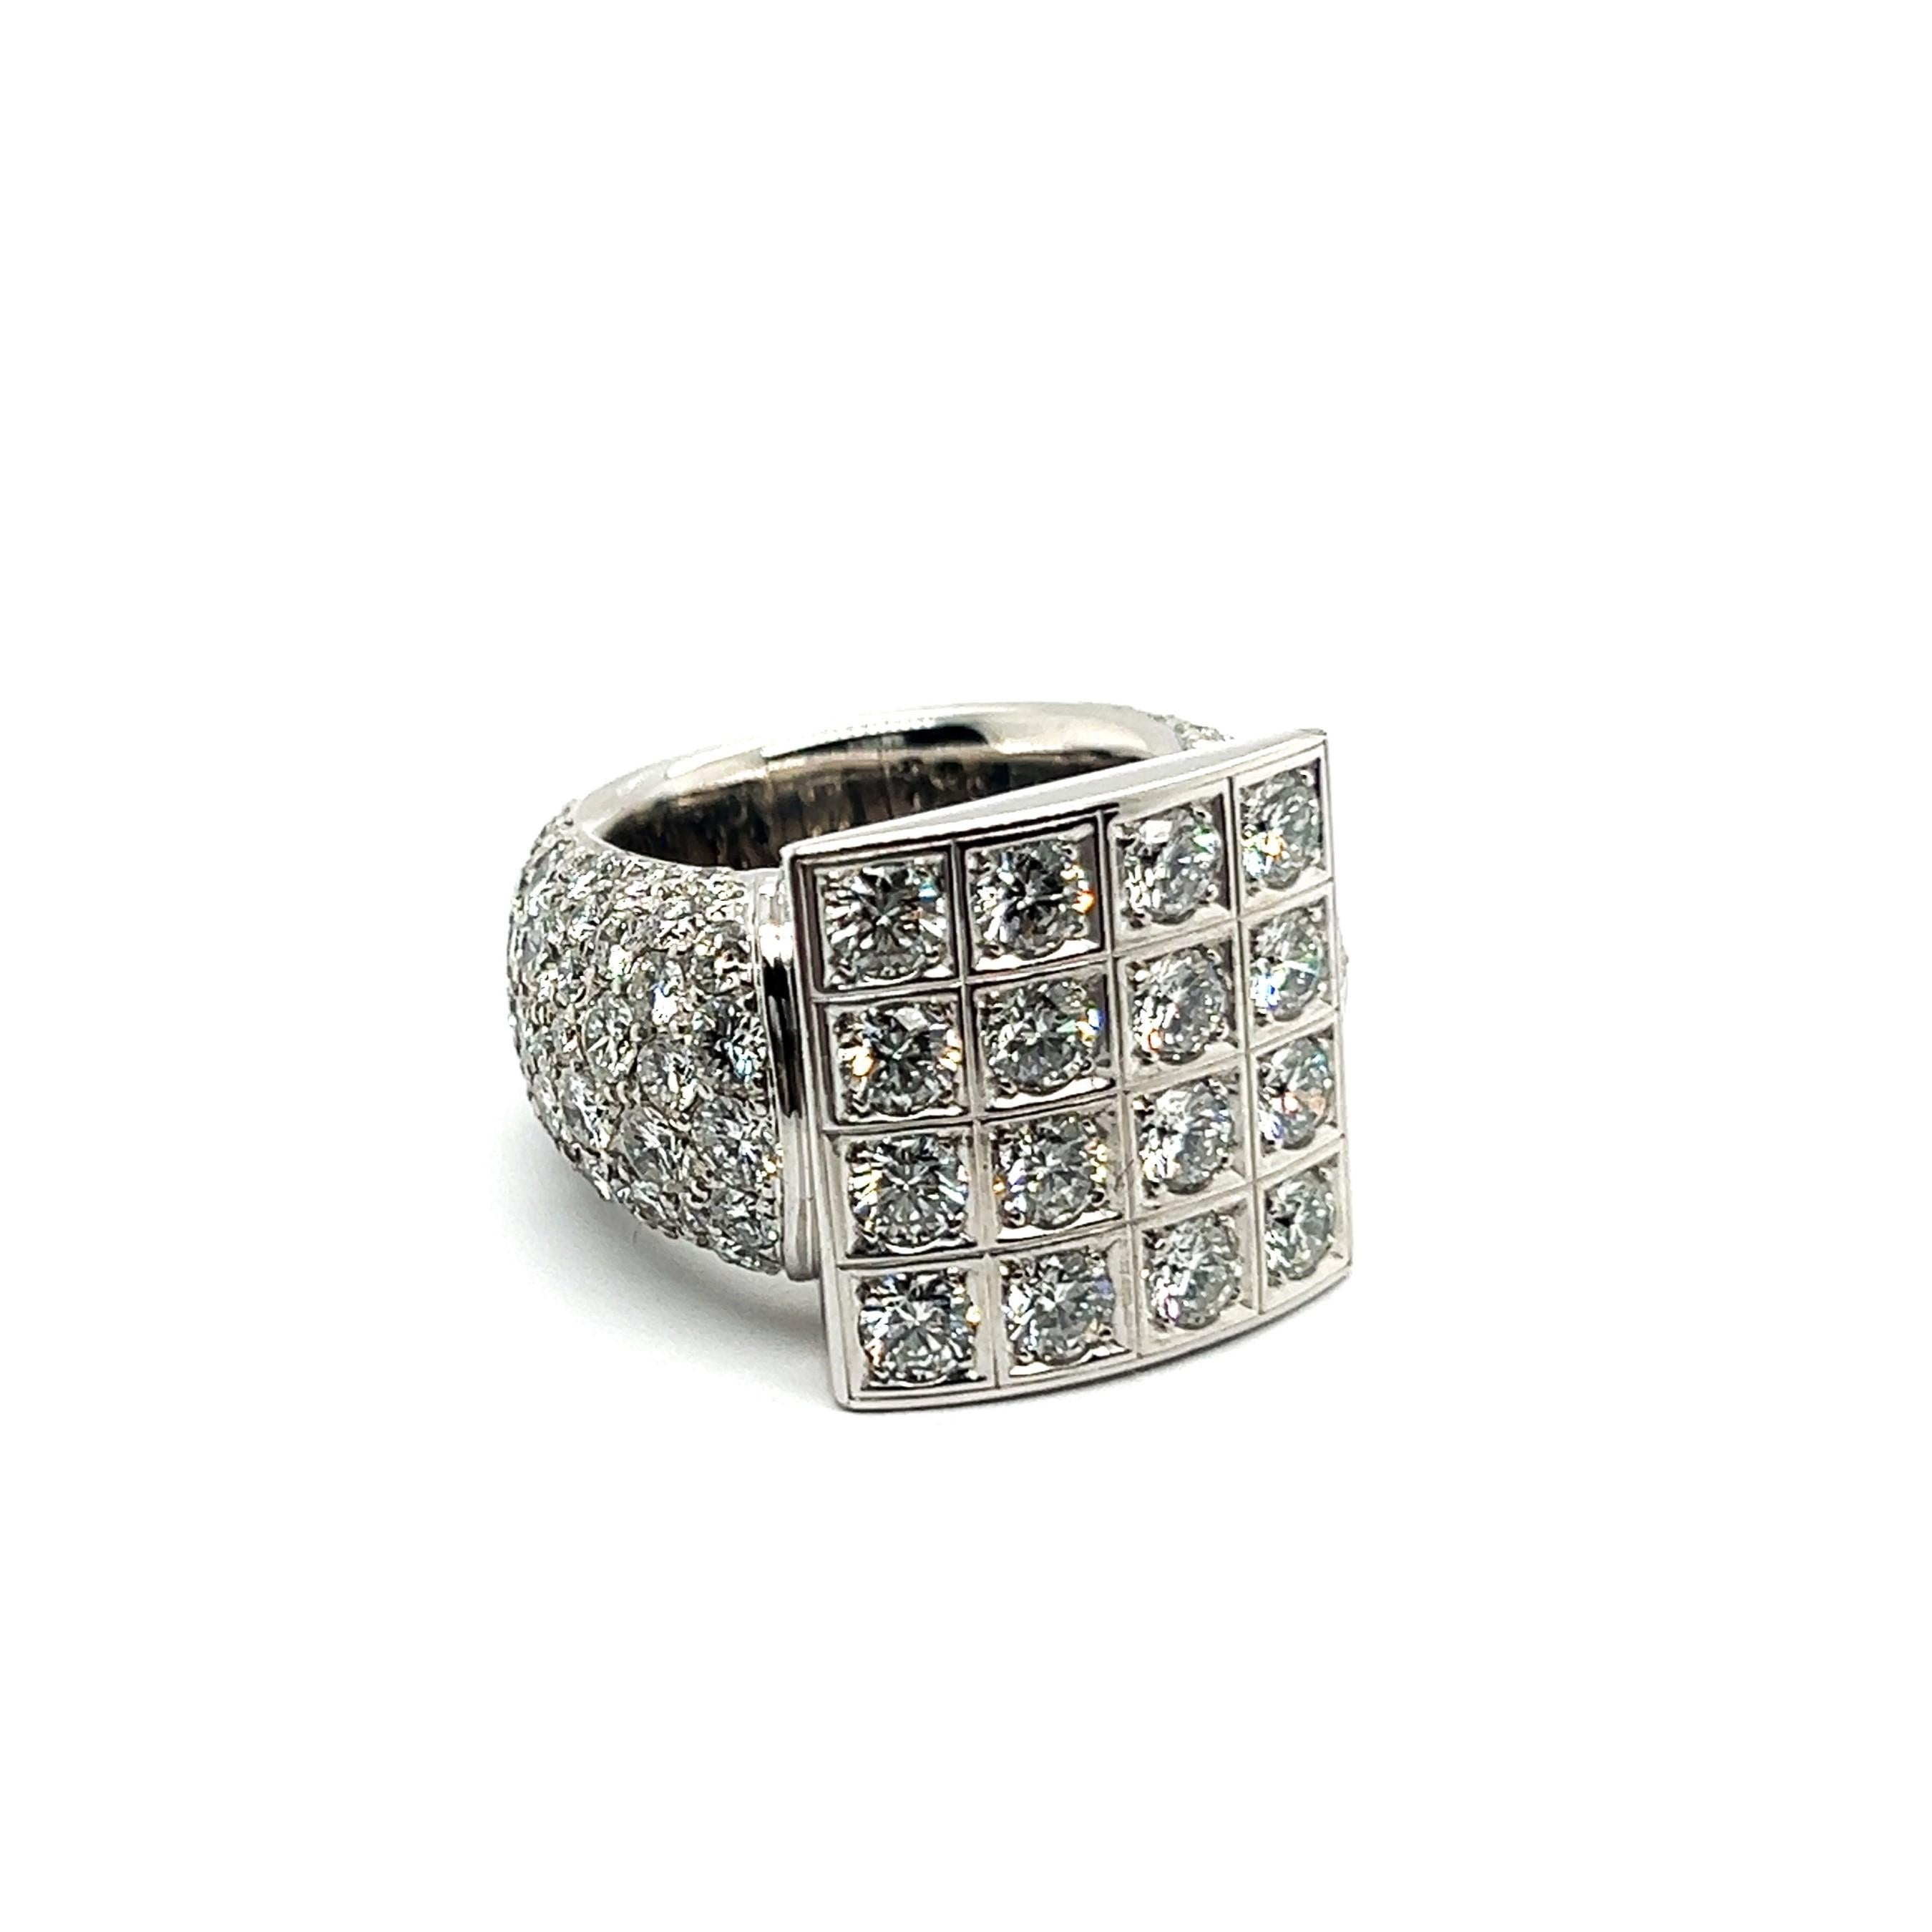 Bold Graphic Ring with Diamonds in 18 Karat White Gold by Majo Fruithof For Sale 1